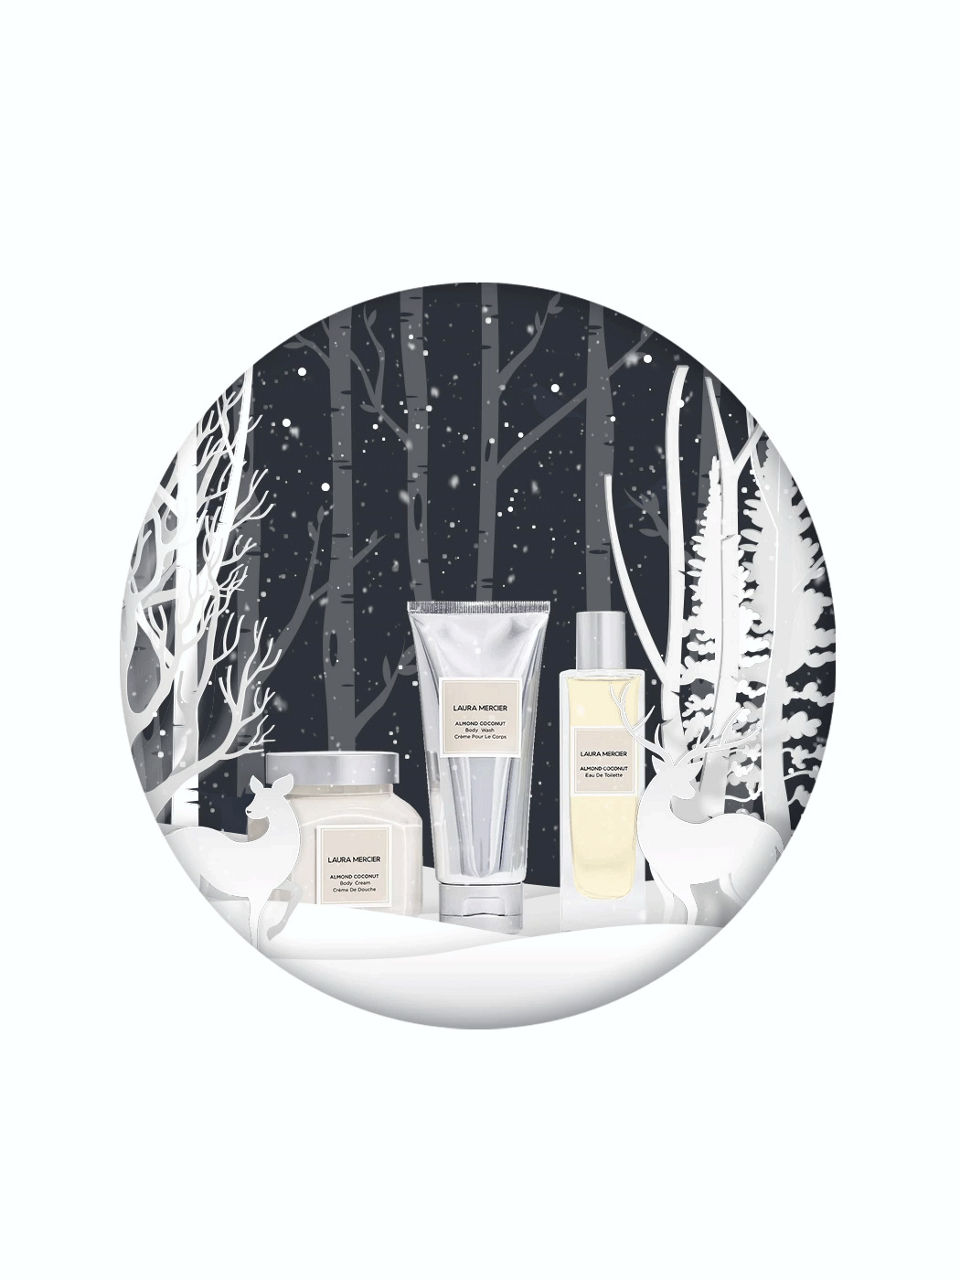 Christmas Beauty Gifts For The Beauty Addict | Brown Thomas